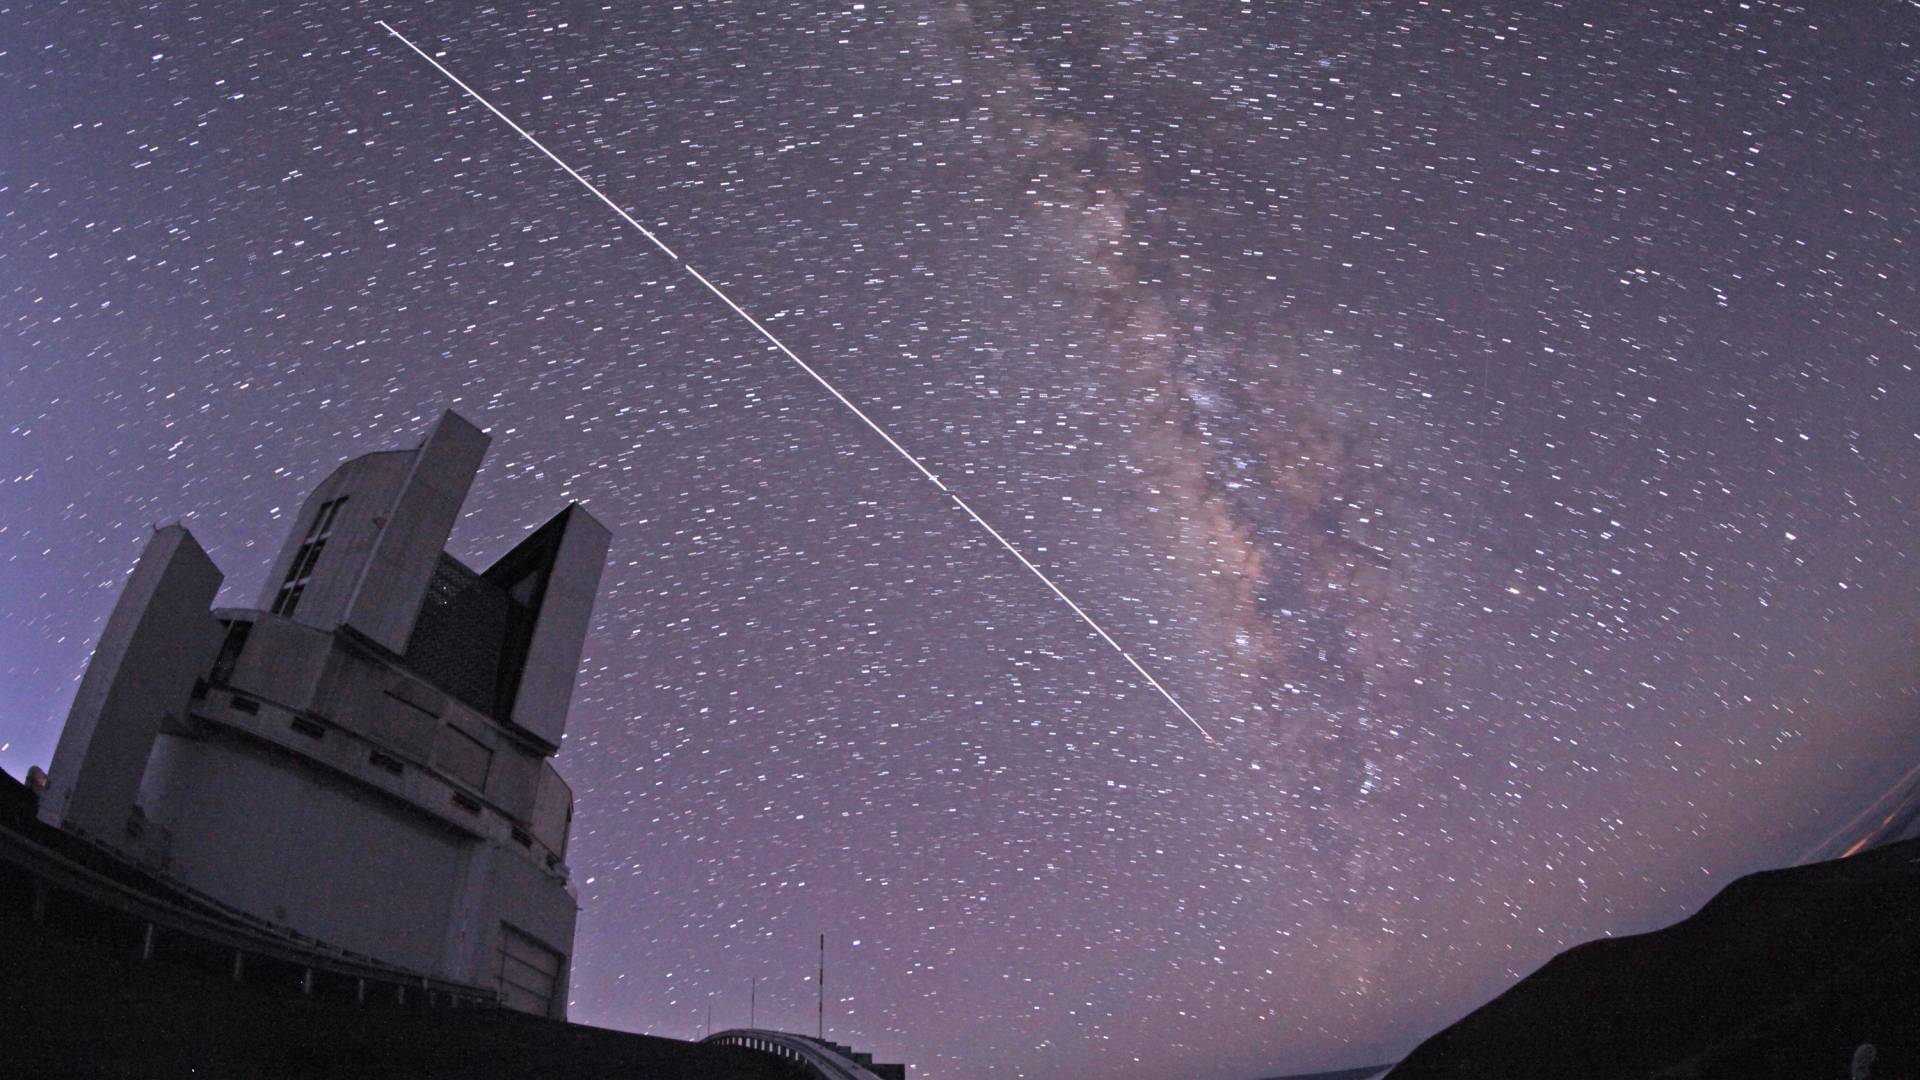 The International Space Station passing over the Subaru Telescope 